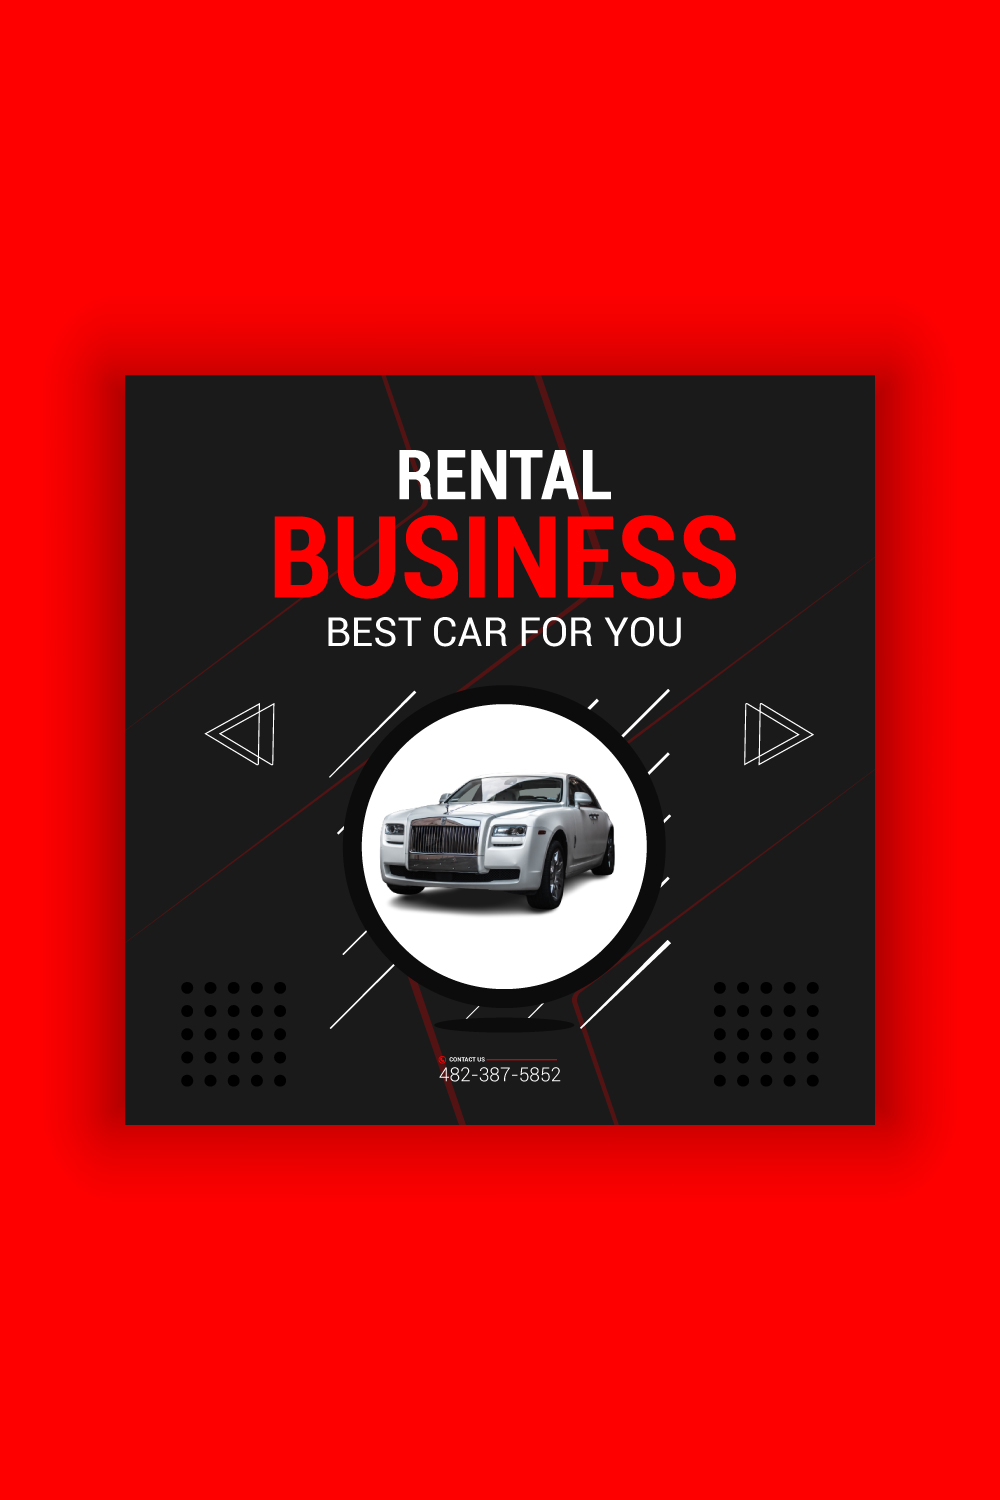 Rent A Car and Rental Business Social Media Post Template Bundle pinterest preview image.